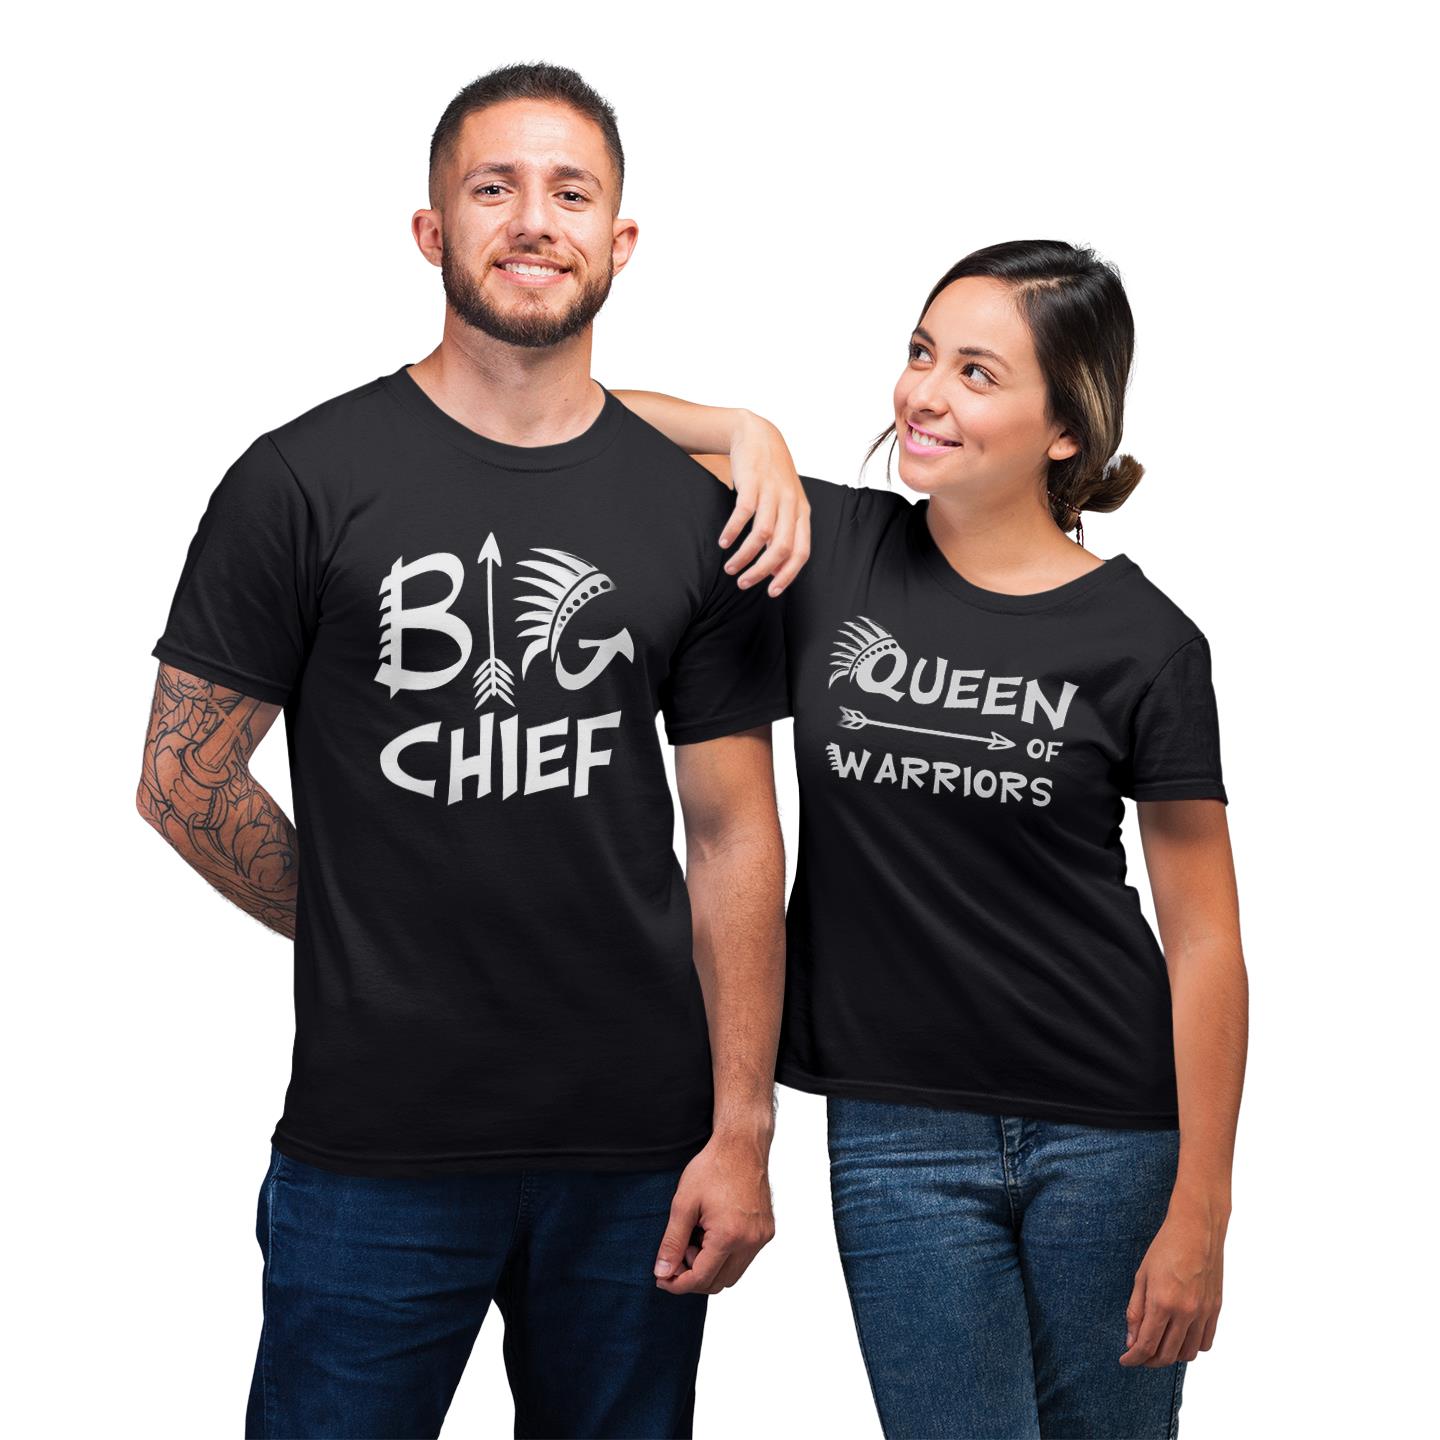 Big Chief And Queen Of Warriors Funny Shirt For Couple Lover T-shirt